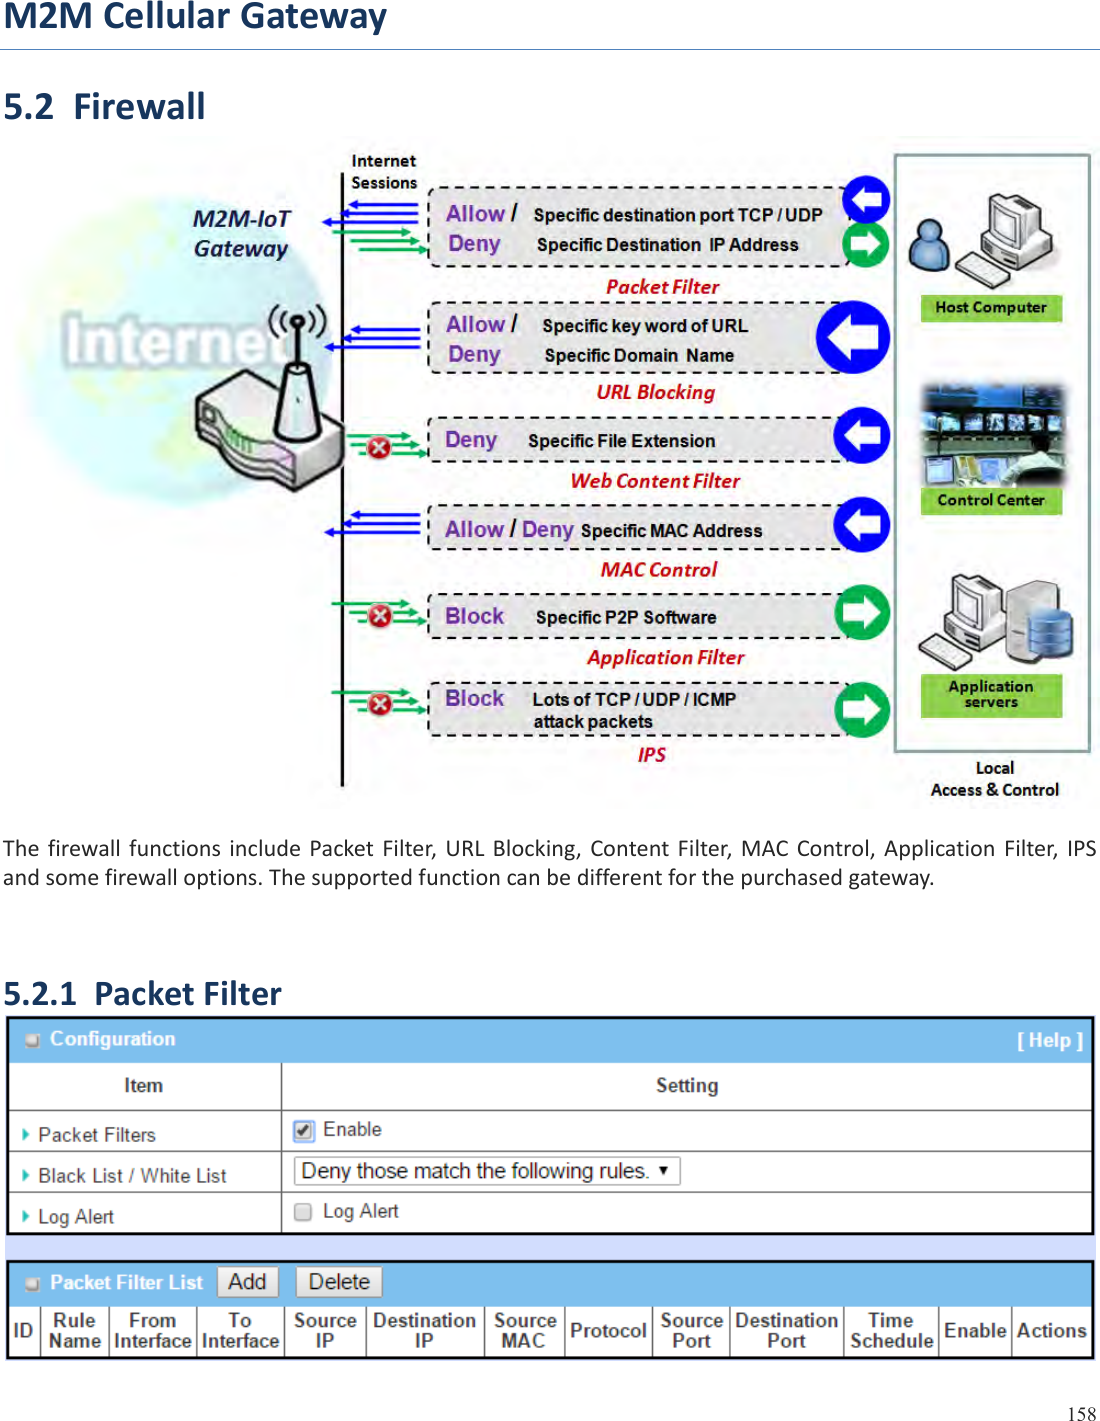 M2MCellularGateway 158  5.2FirewallThe firewall functions include Packet Filter, URL Blocking, Content Filter, MAC Control, Application Filter, IPSandsomefirewalloptions.Thesupportedfunctioncanbedifferentforthepurchasedgateway.5.2.1PacketFilter